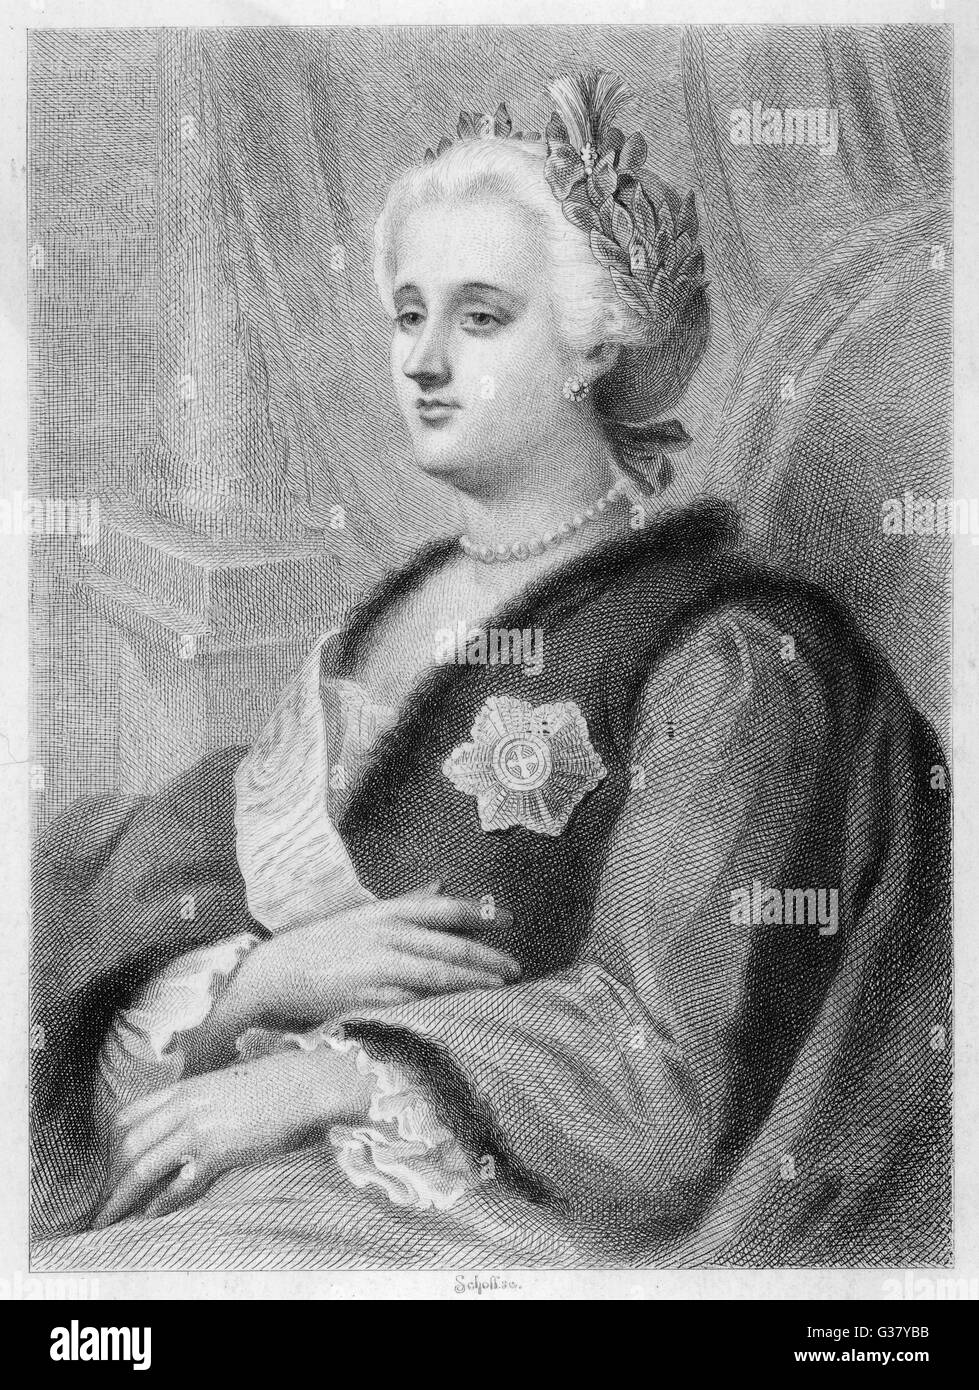 Catherine the Great(1729-1796), Empress of Russia, 1762-96. Stock Photo